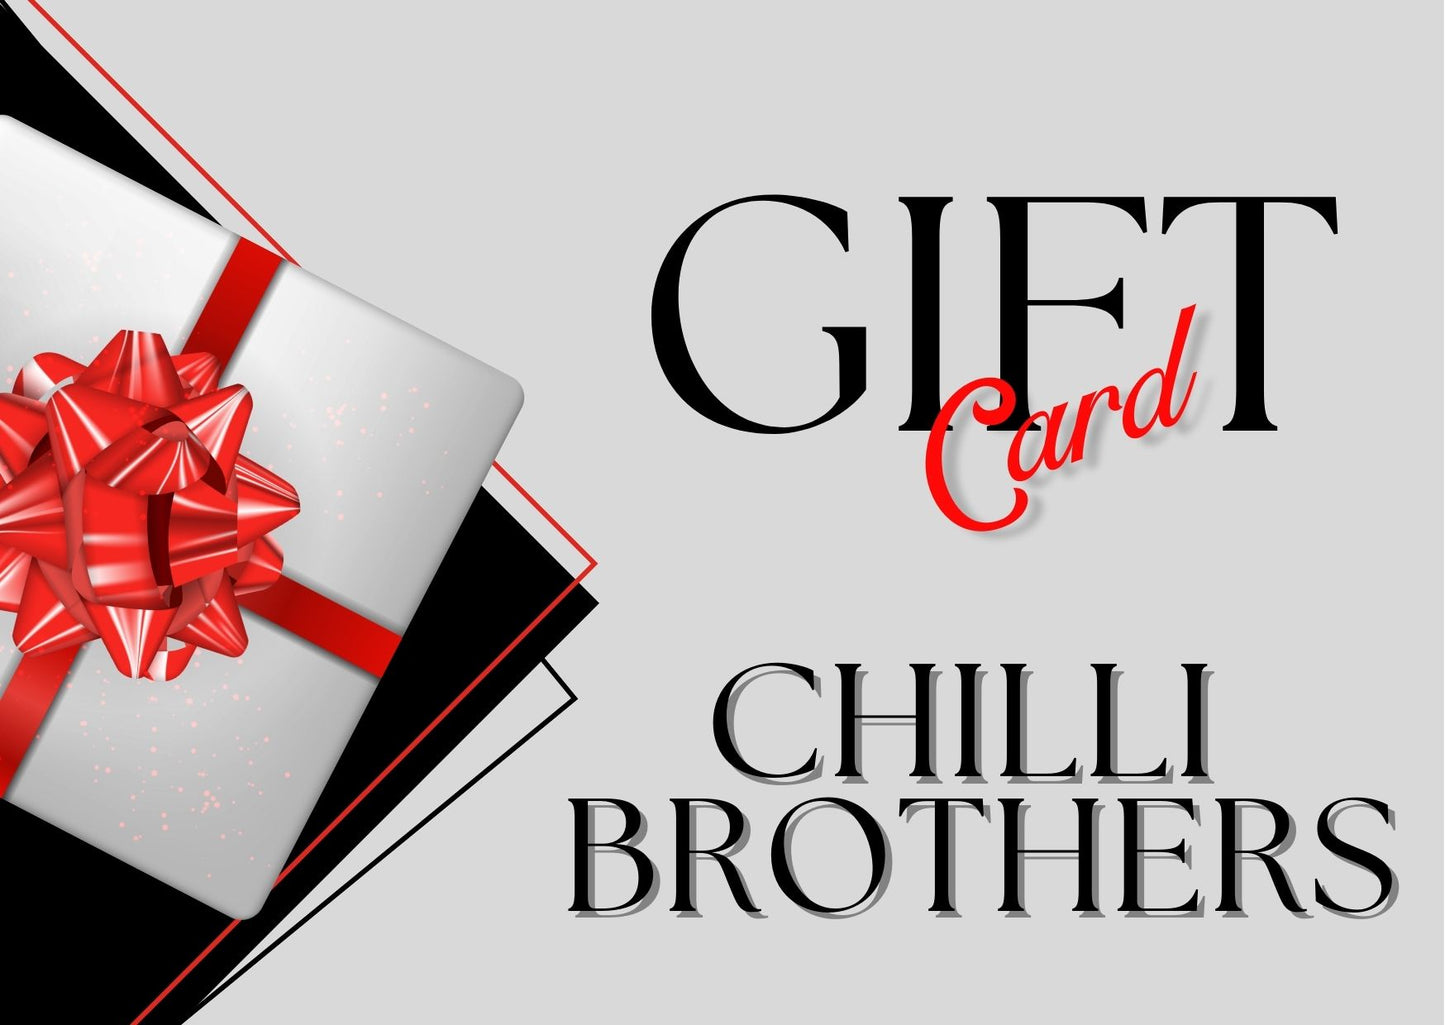 Limited Edition Gift Card